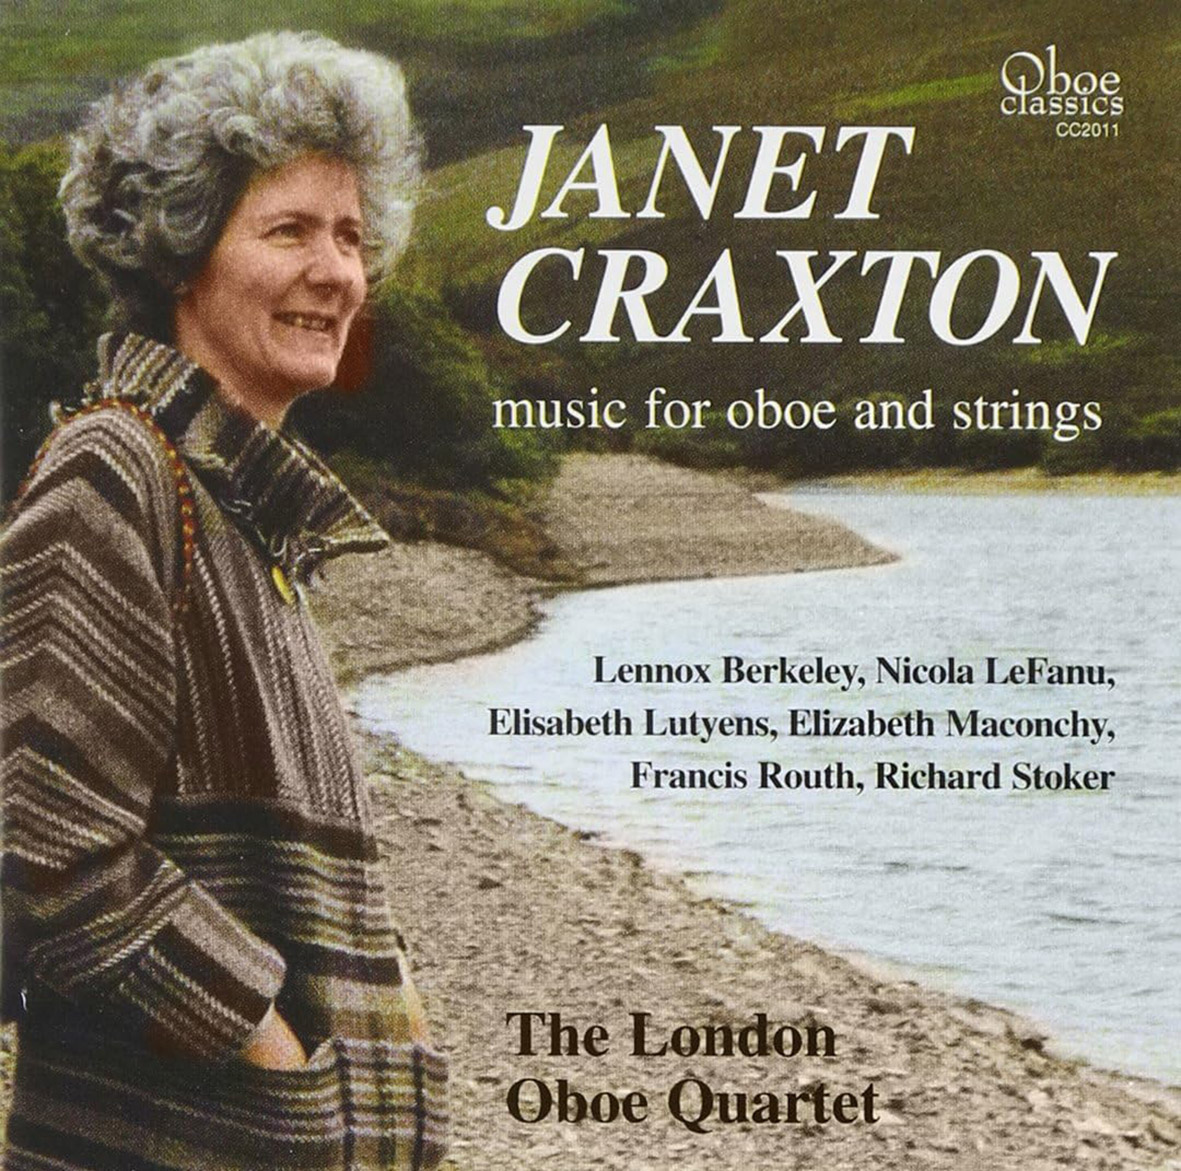 'Janet Craxton: music for oboe and strings' CD cover.  Performed by The London Oboe Quartet